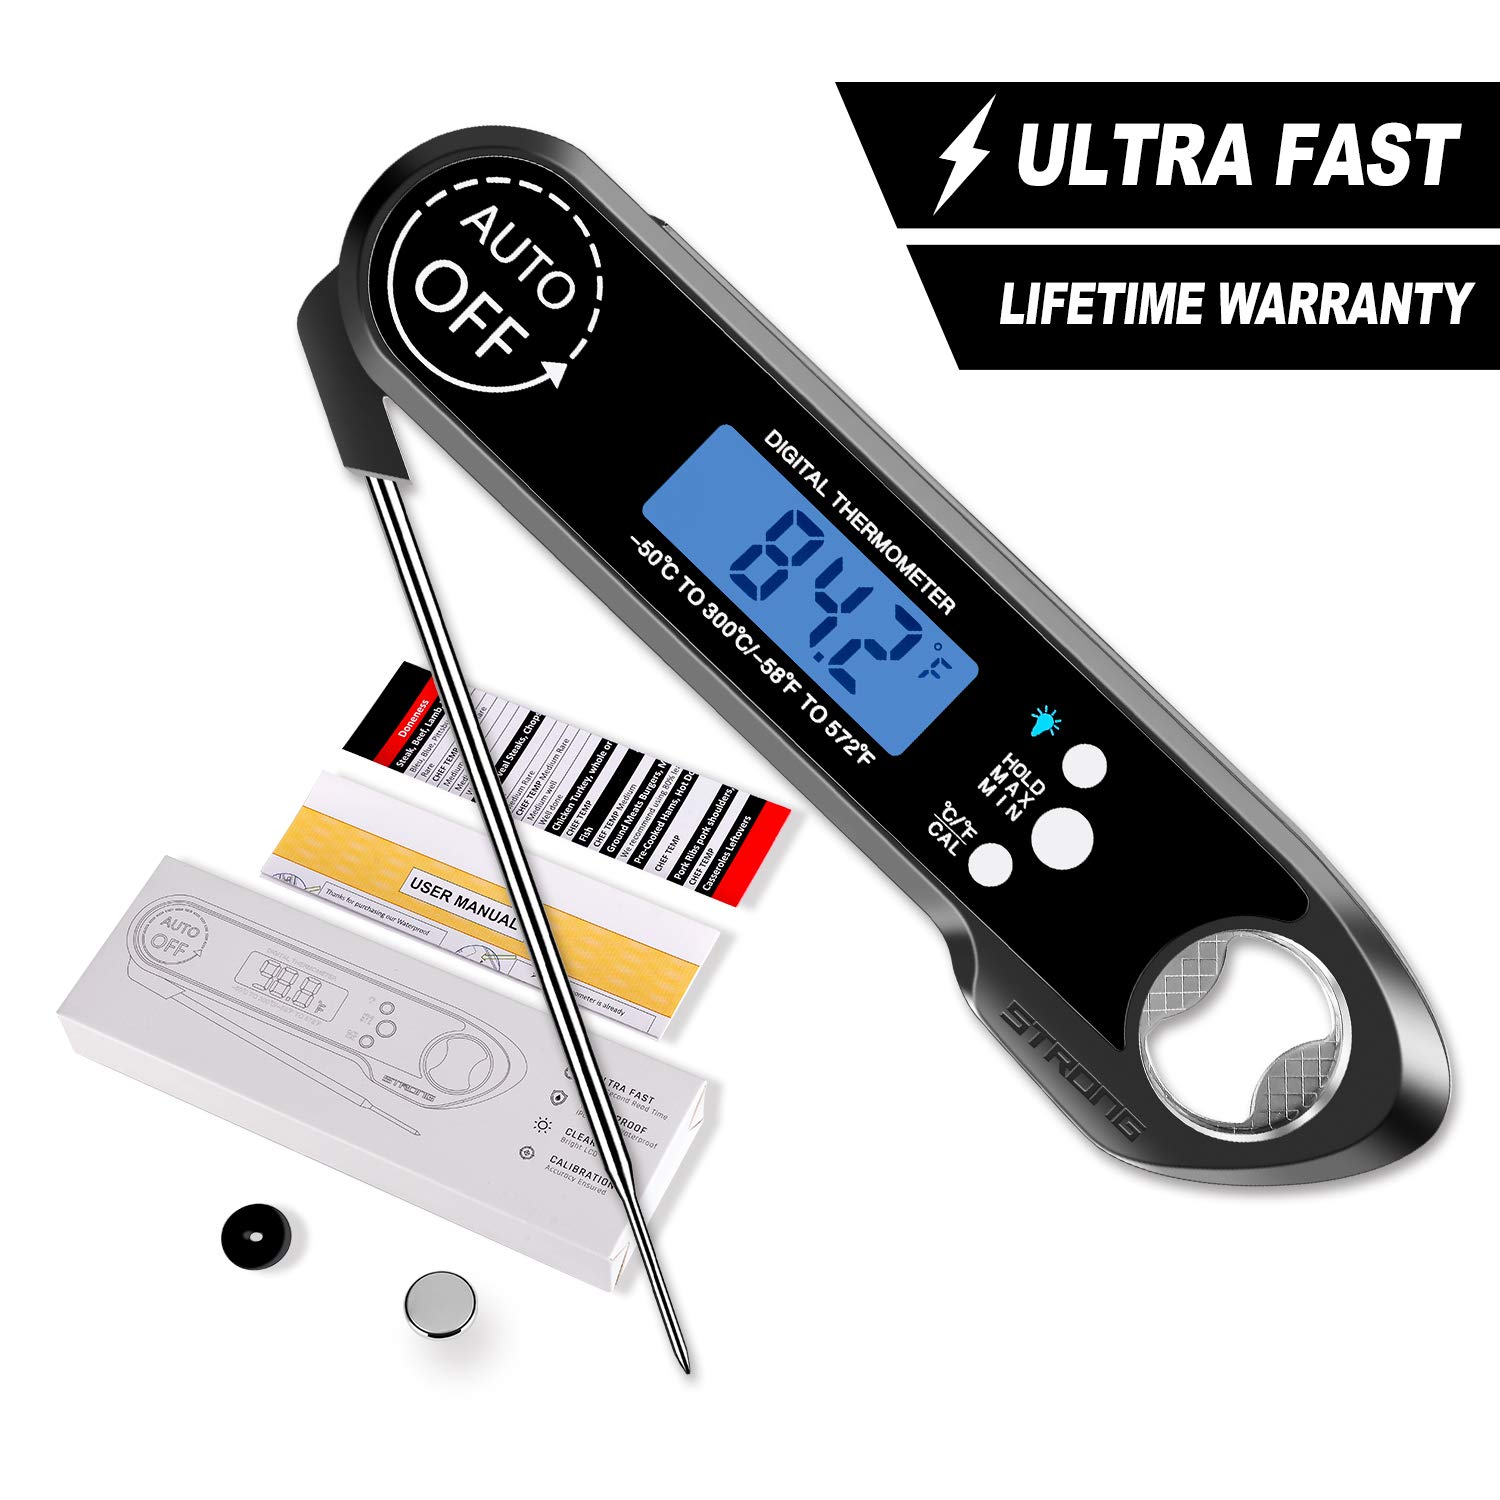 Auto-off Digital Meat Thermometer, Instant Read Food Cooking Thermometer with 4.6